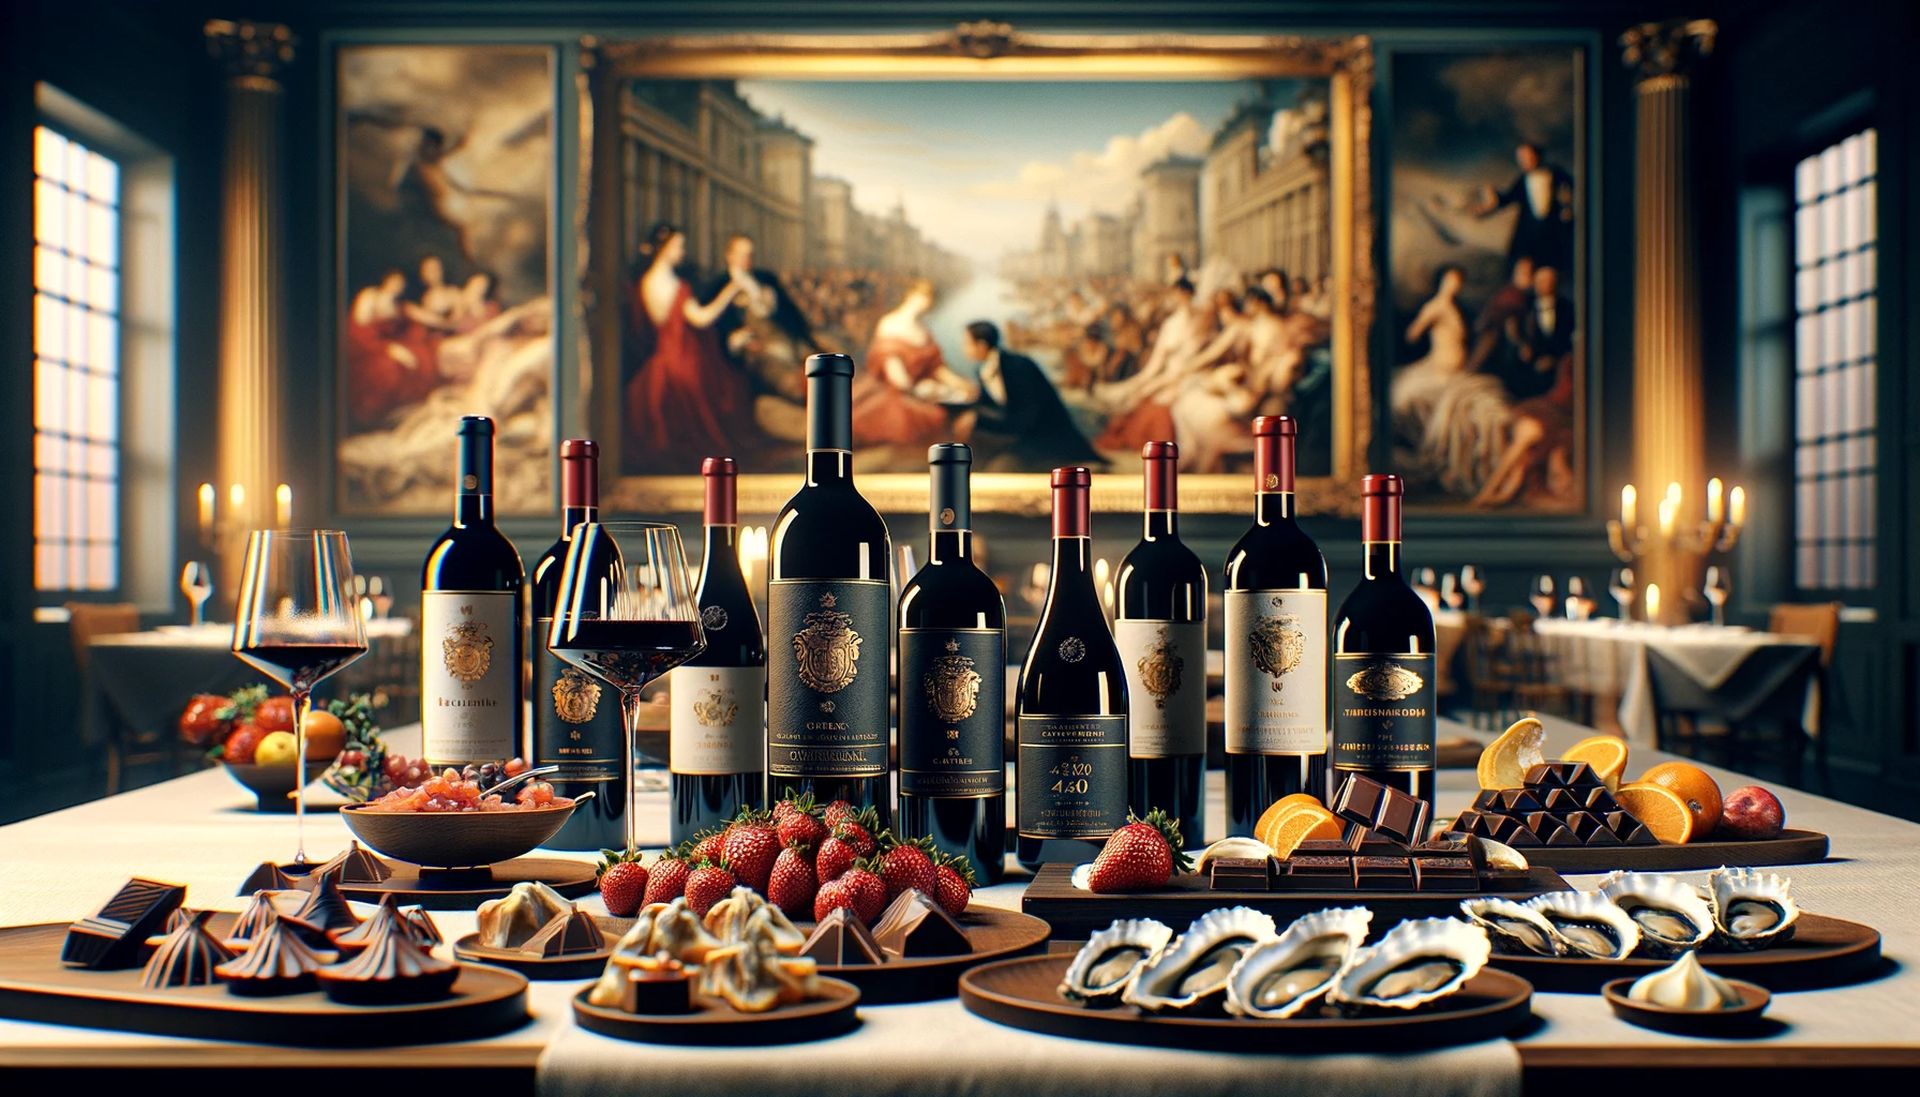 A sophisticated display showcasing various wine bottles, each paired with an aphrodisiac food, to illustrate the art of romantic culinary. | Image credit: Encyclopedia Wines